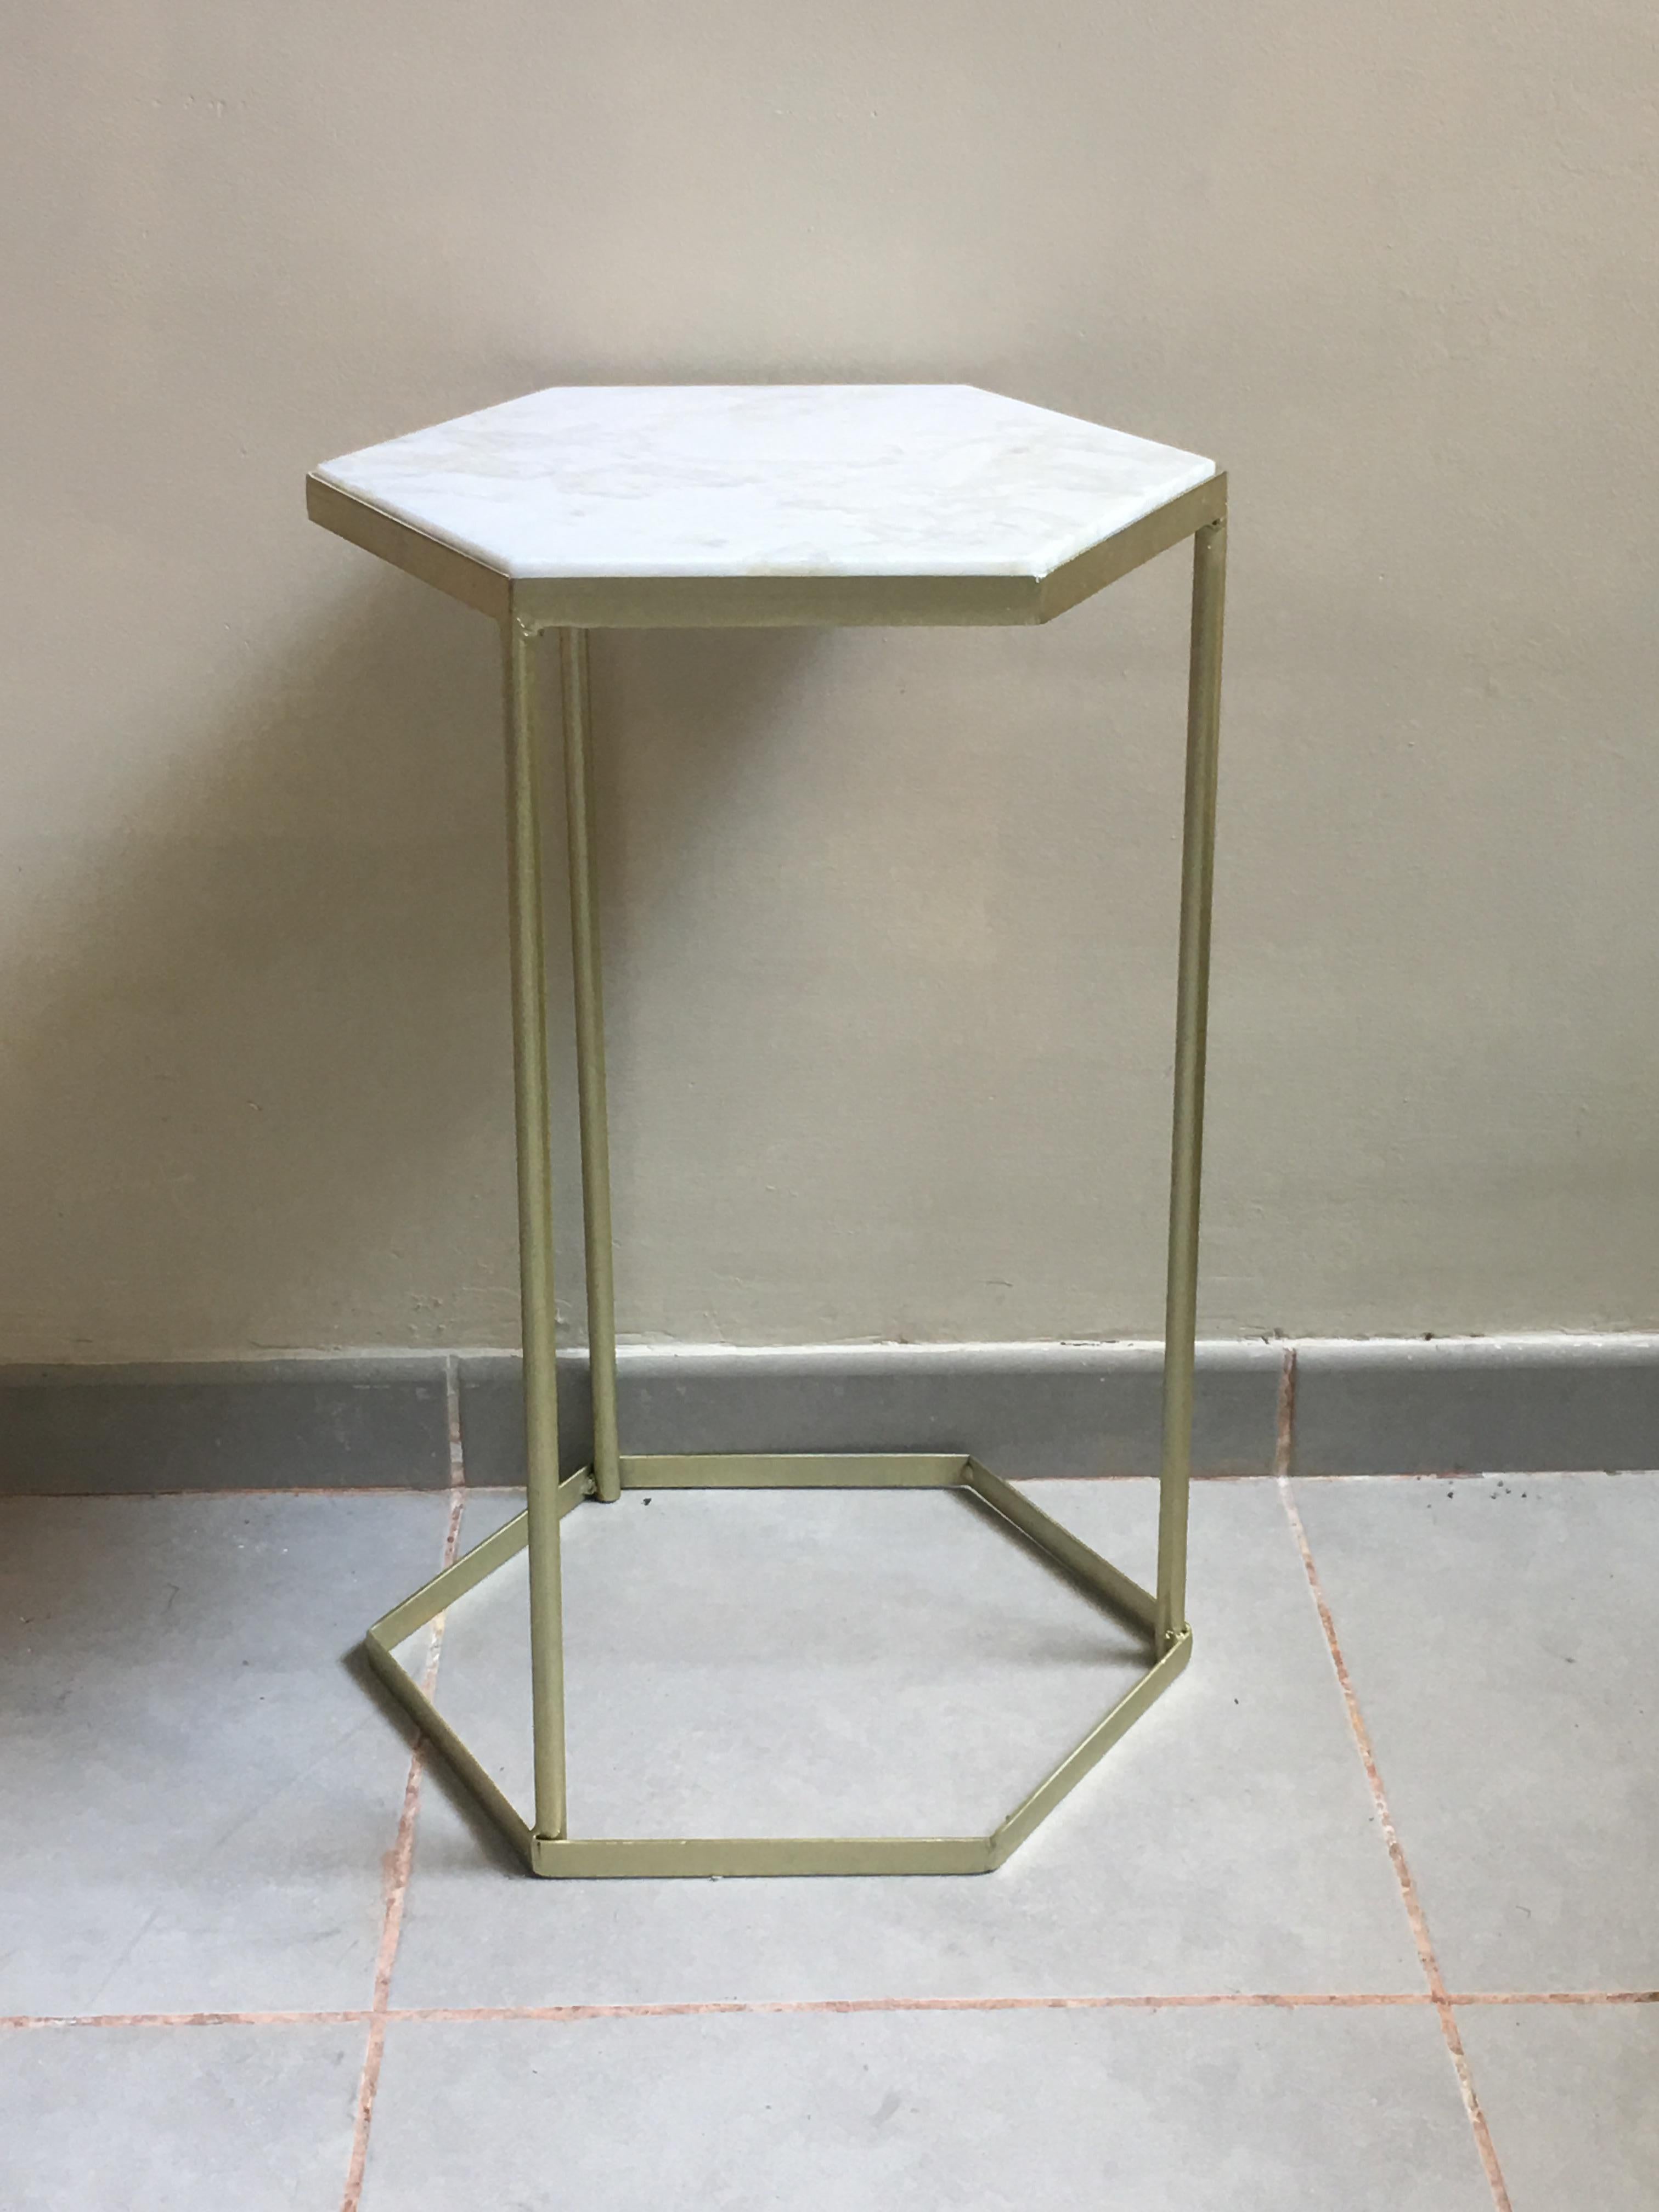 New Marble-Top and Gilt Painted Iron Hexagonal Side Table or End Table In Excellent Condition For Sale In Miami, FL